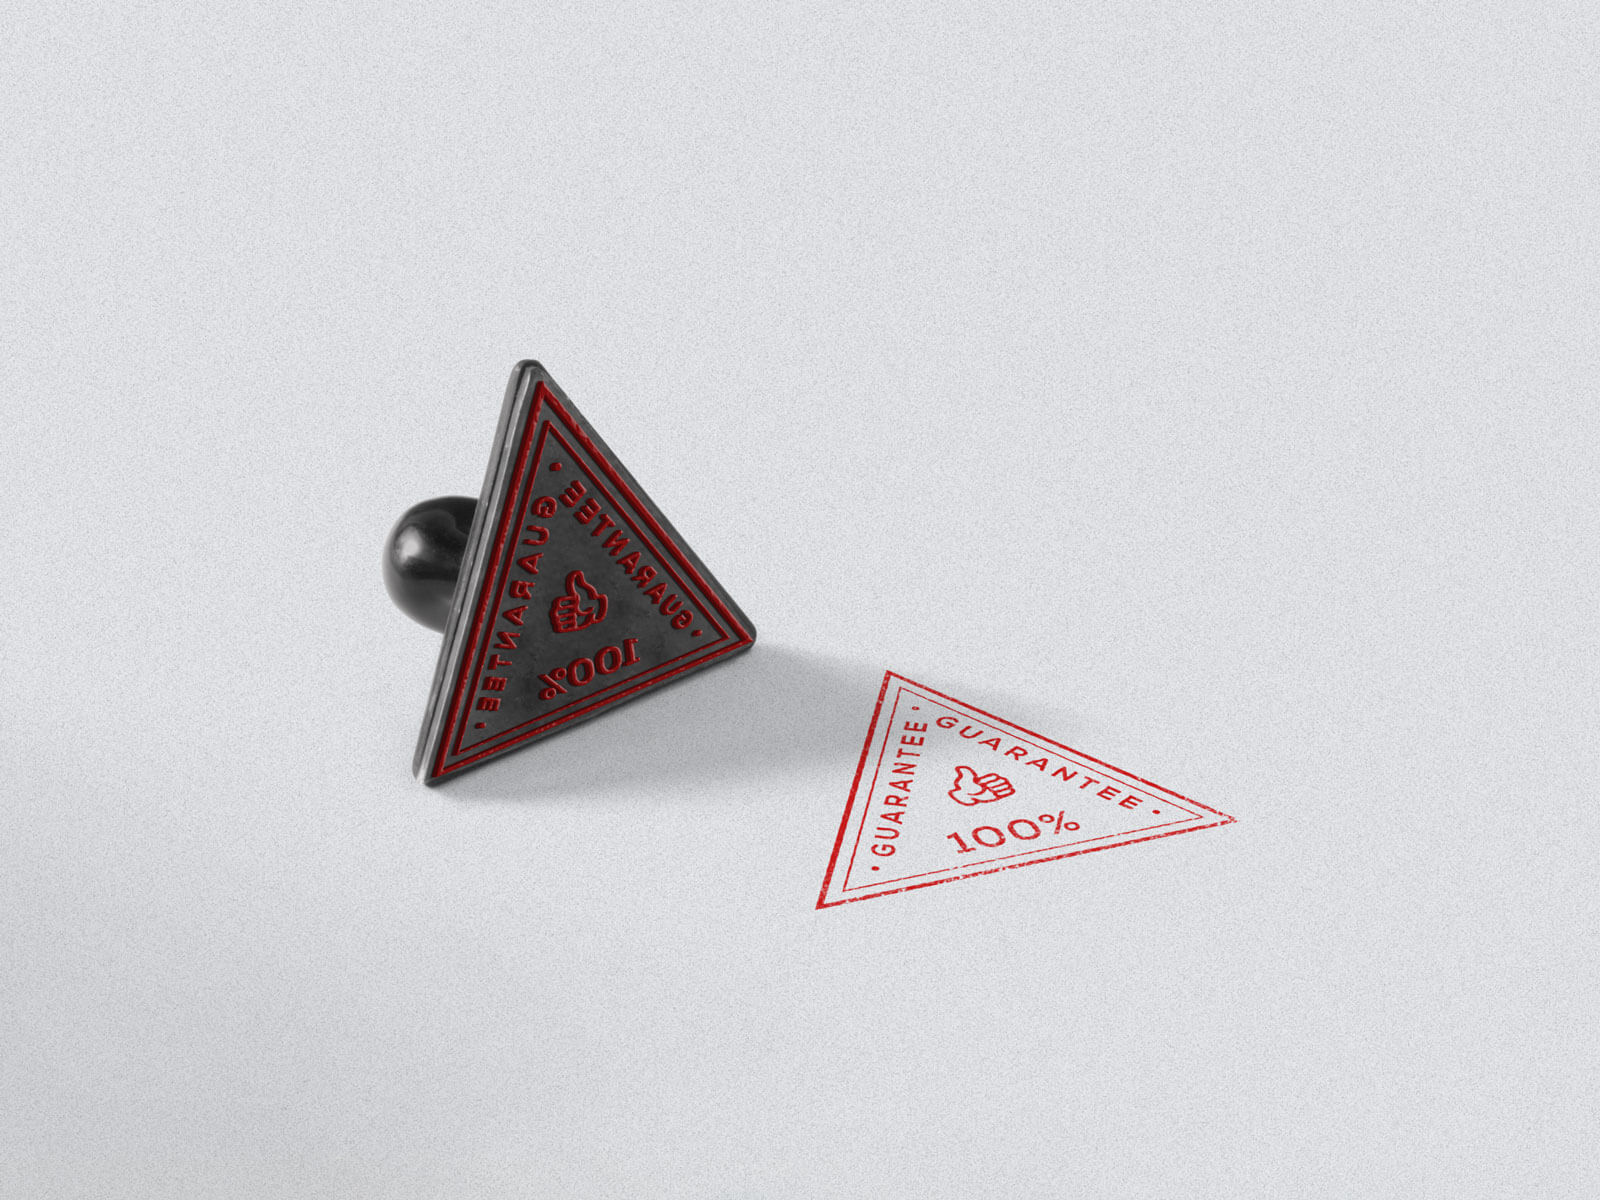 Triangle Rubber Stamp With Metal Body Mockup FREE PSD